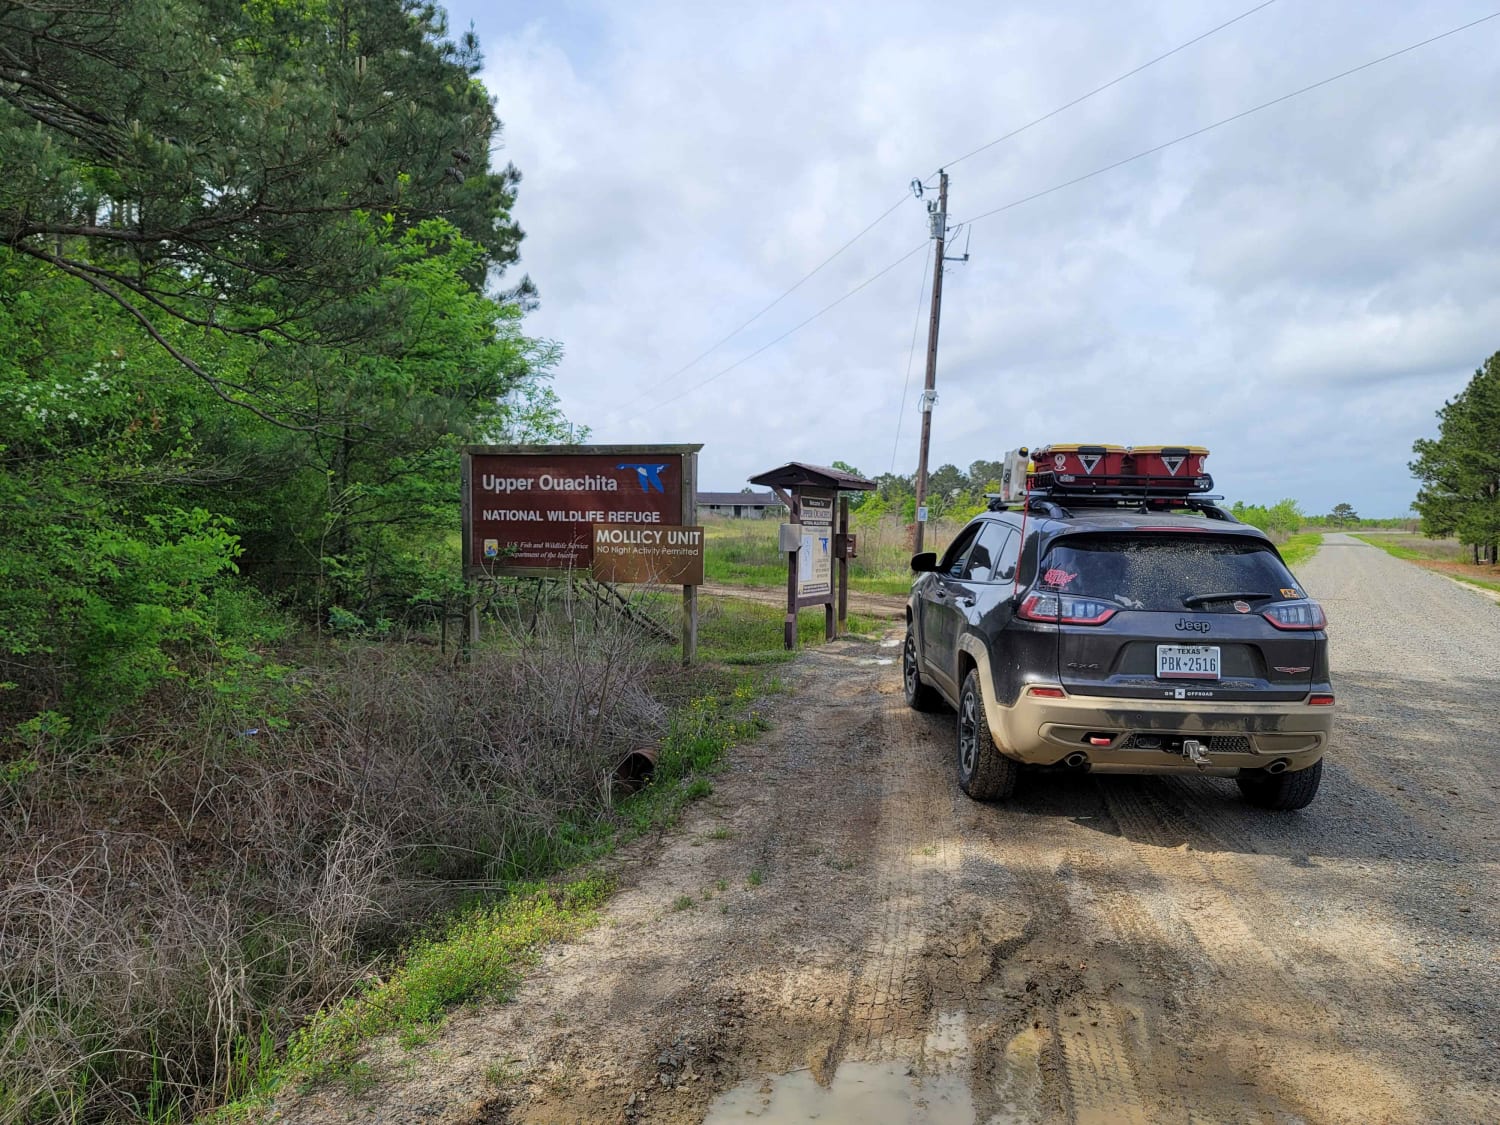 The Arkansas Overland Route – TrailHawk Loop – Section 23